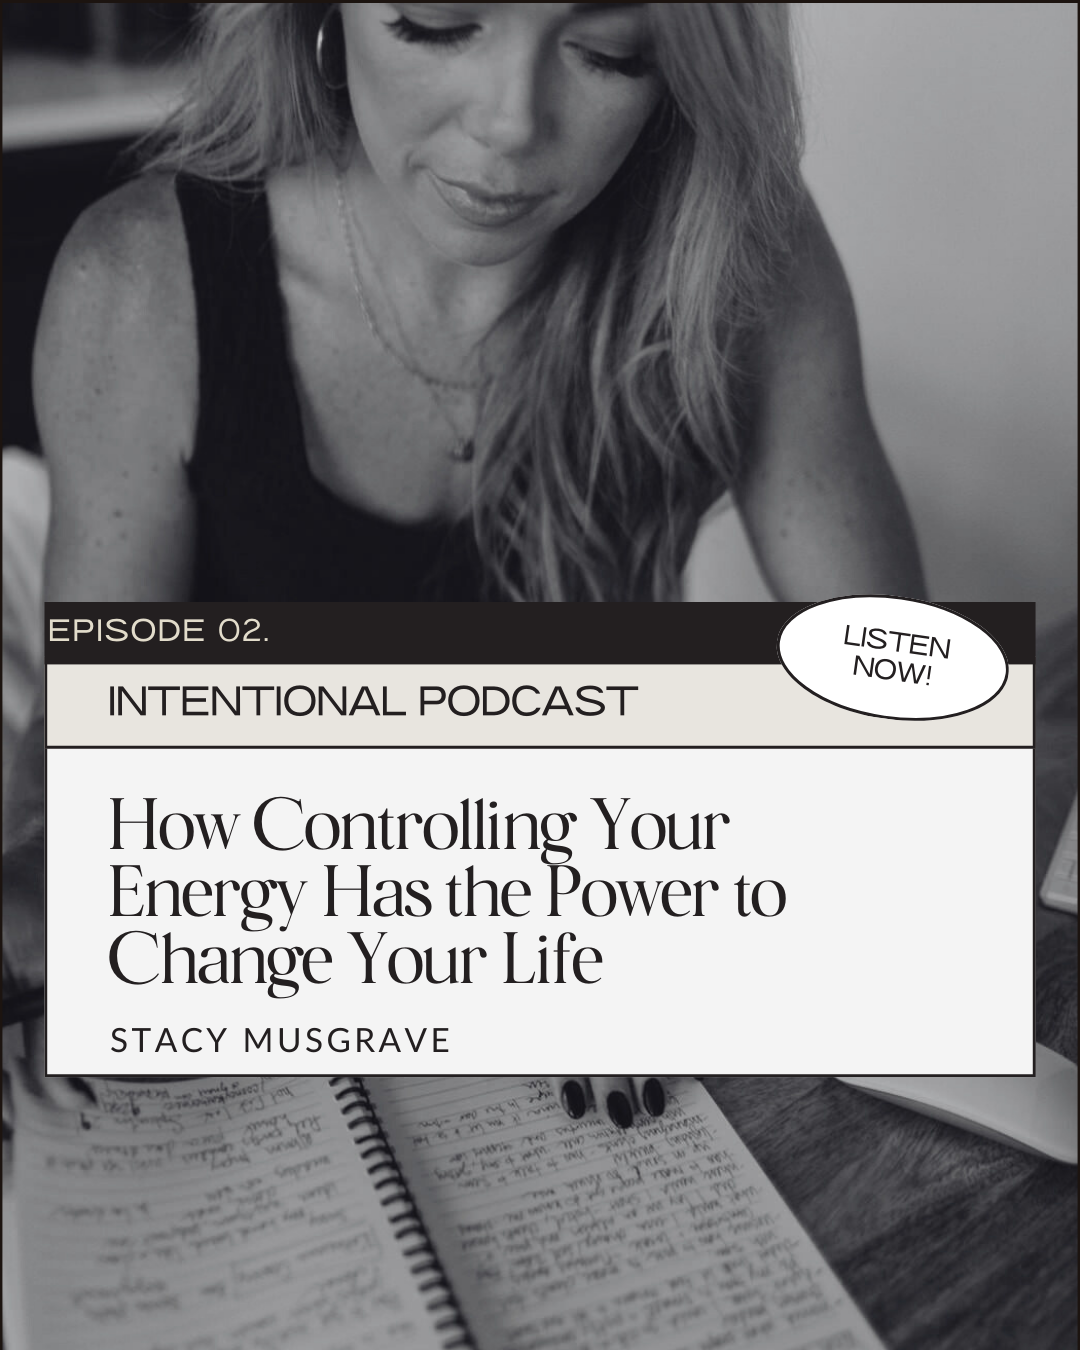 How Controlling Your Energy Has the Power to Change Your Life